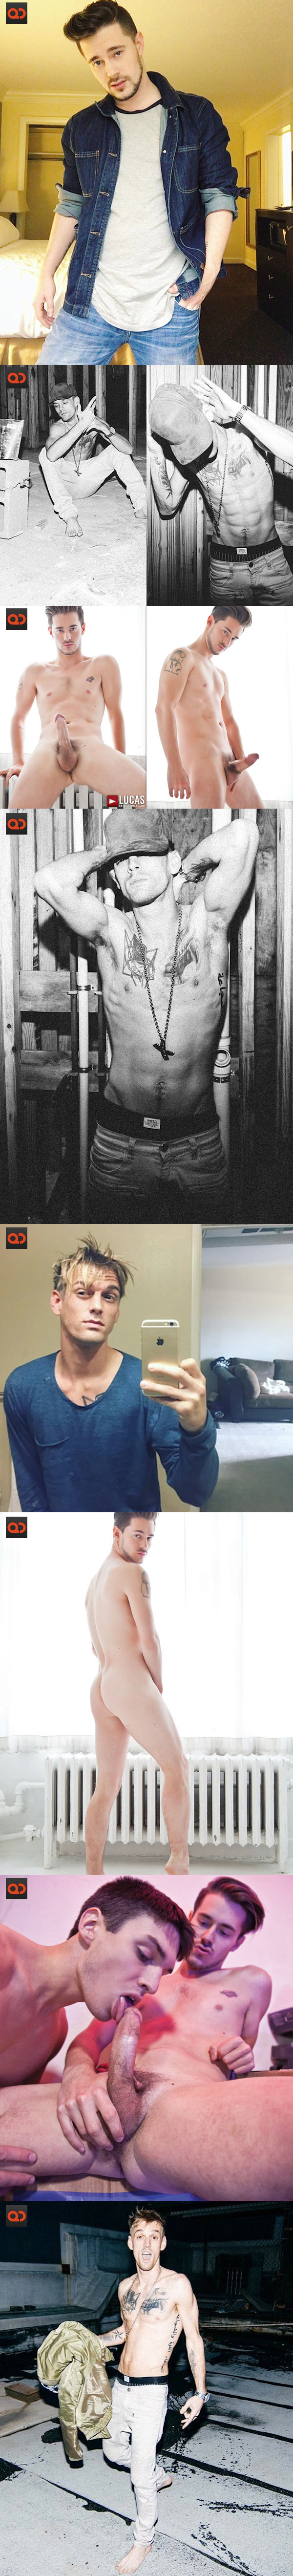 Aaron Carter And Chris Crocker Are More Than Just Friends Now? The Singer And The Former Porn Actor Shared Photos And Videos Of Their Close “Friendship”